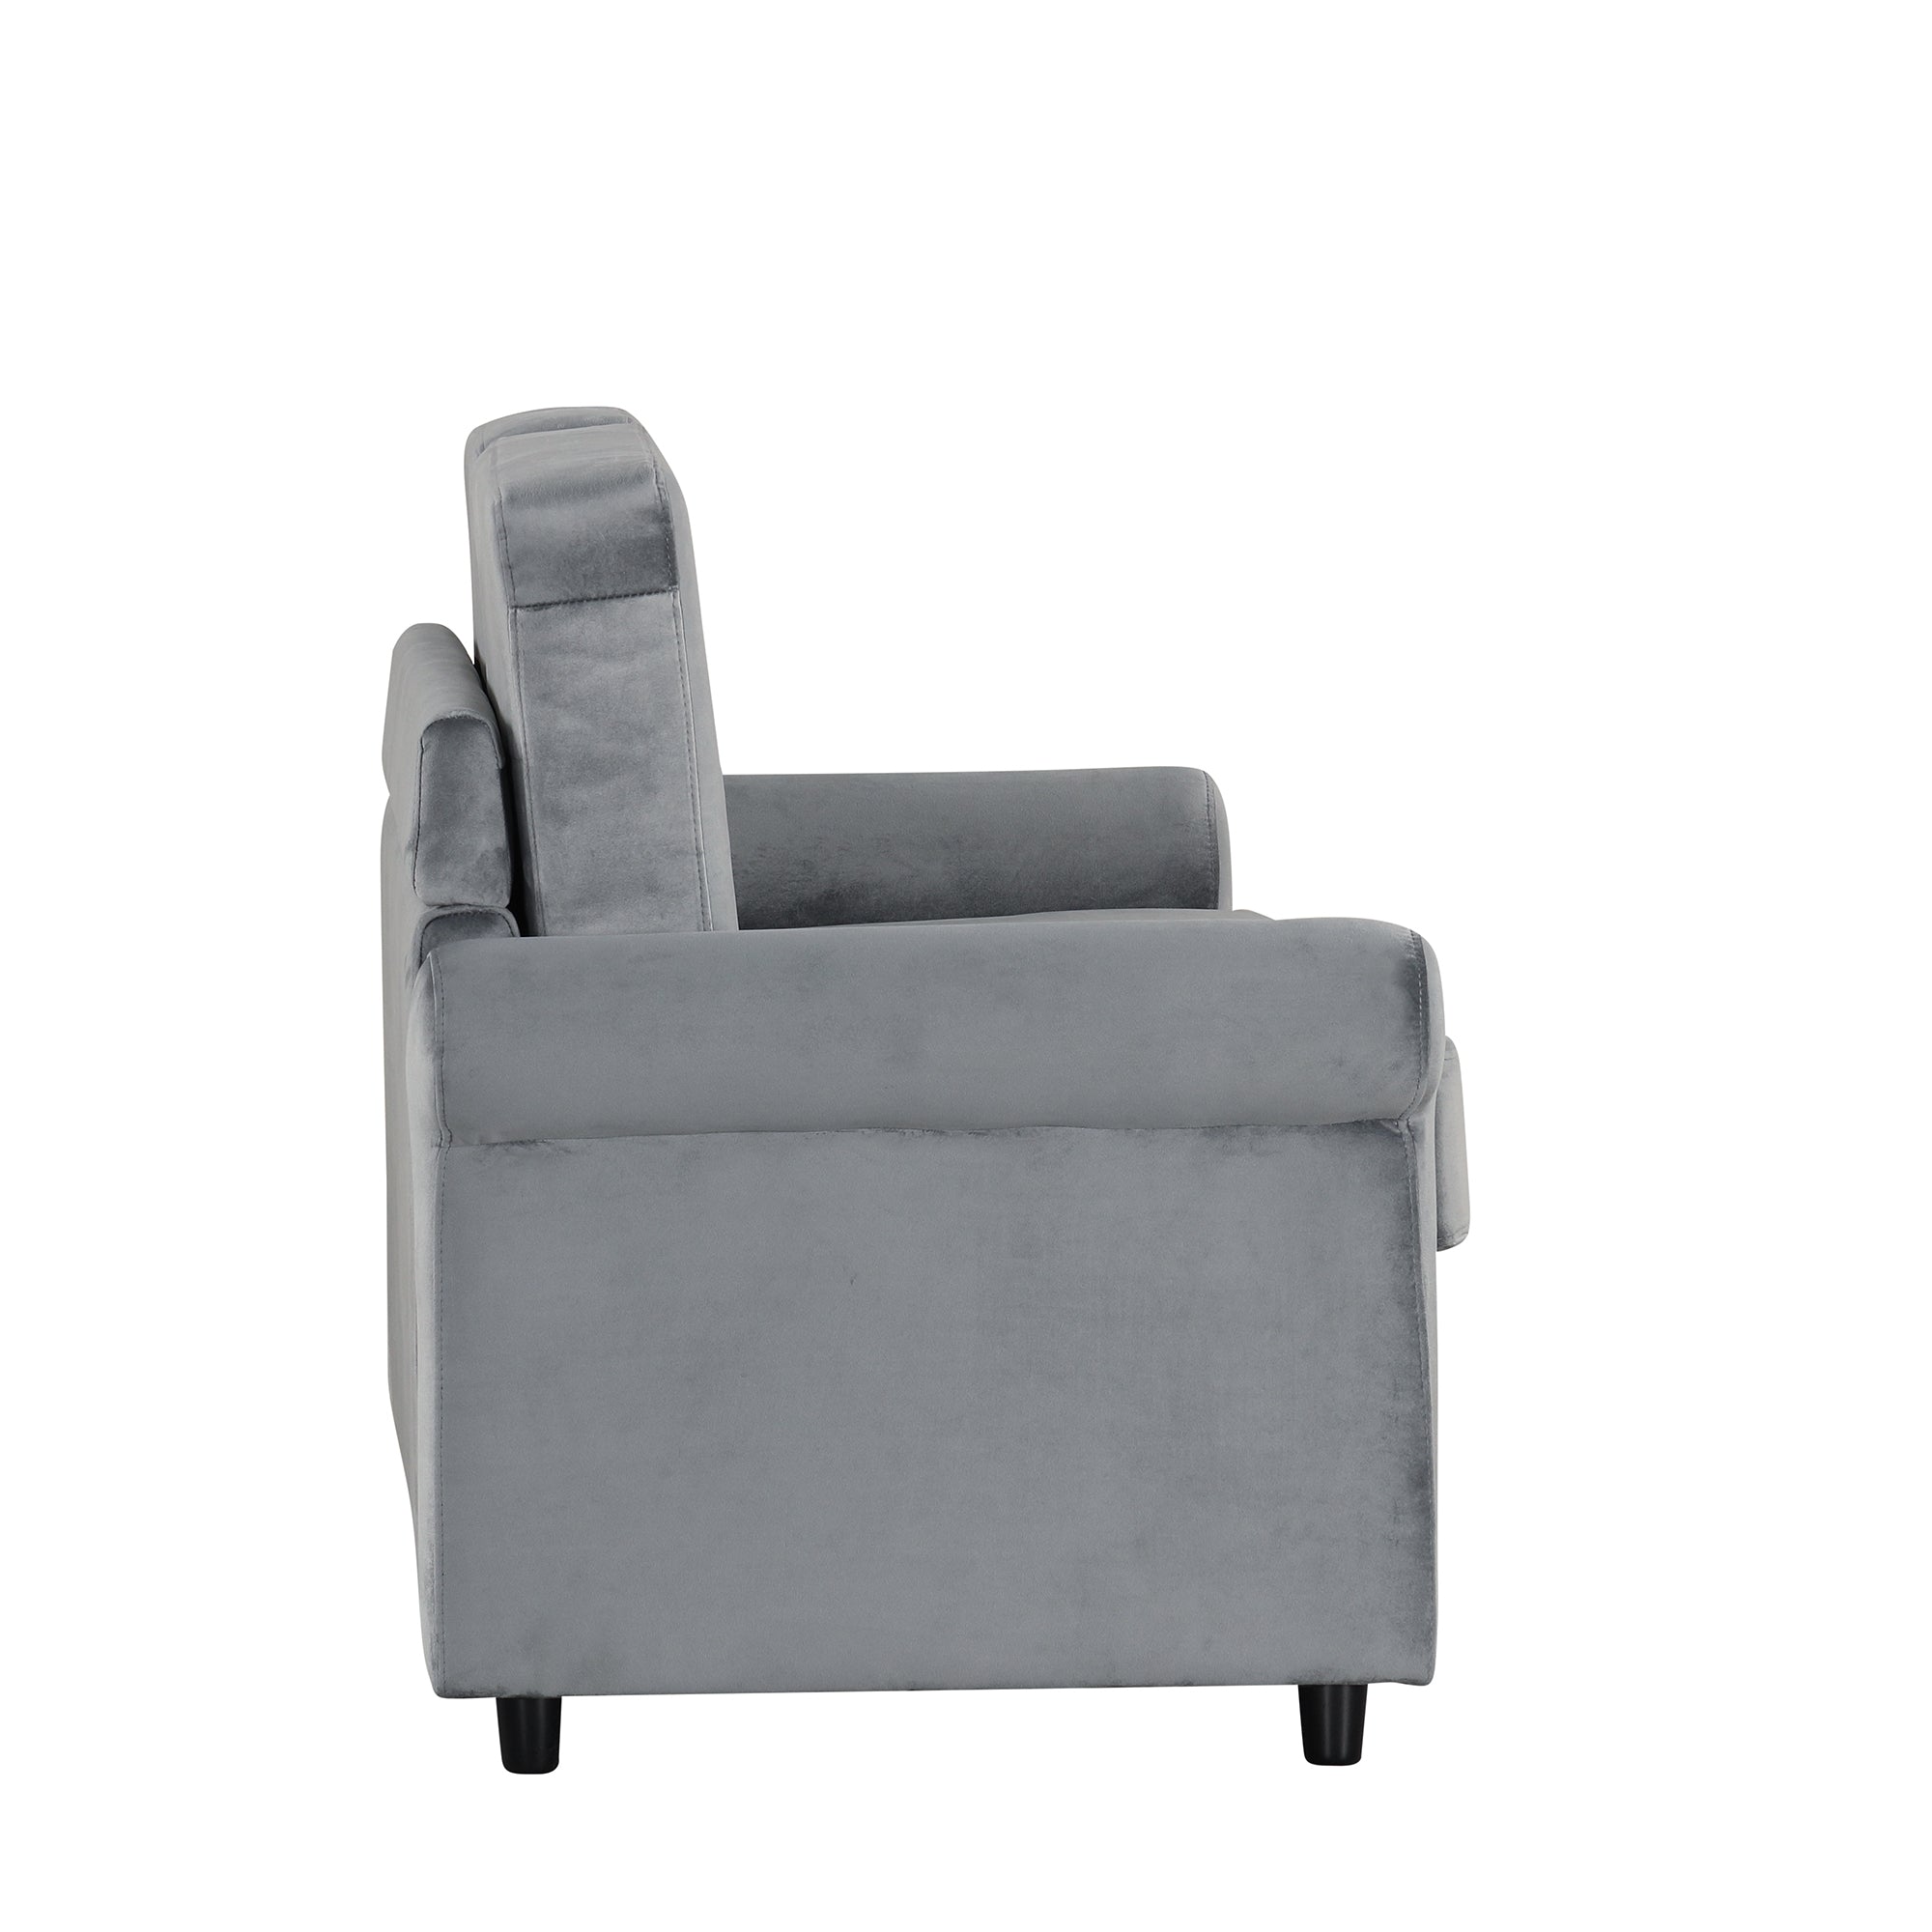 57.4" Pull Out Sofa Bed,Sleeper Sofa Bed with Premium gray-foam-velvet